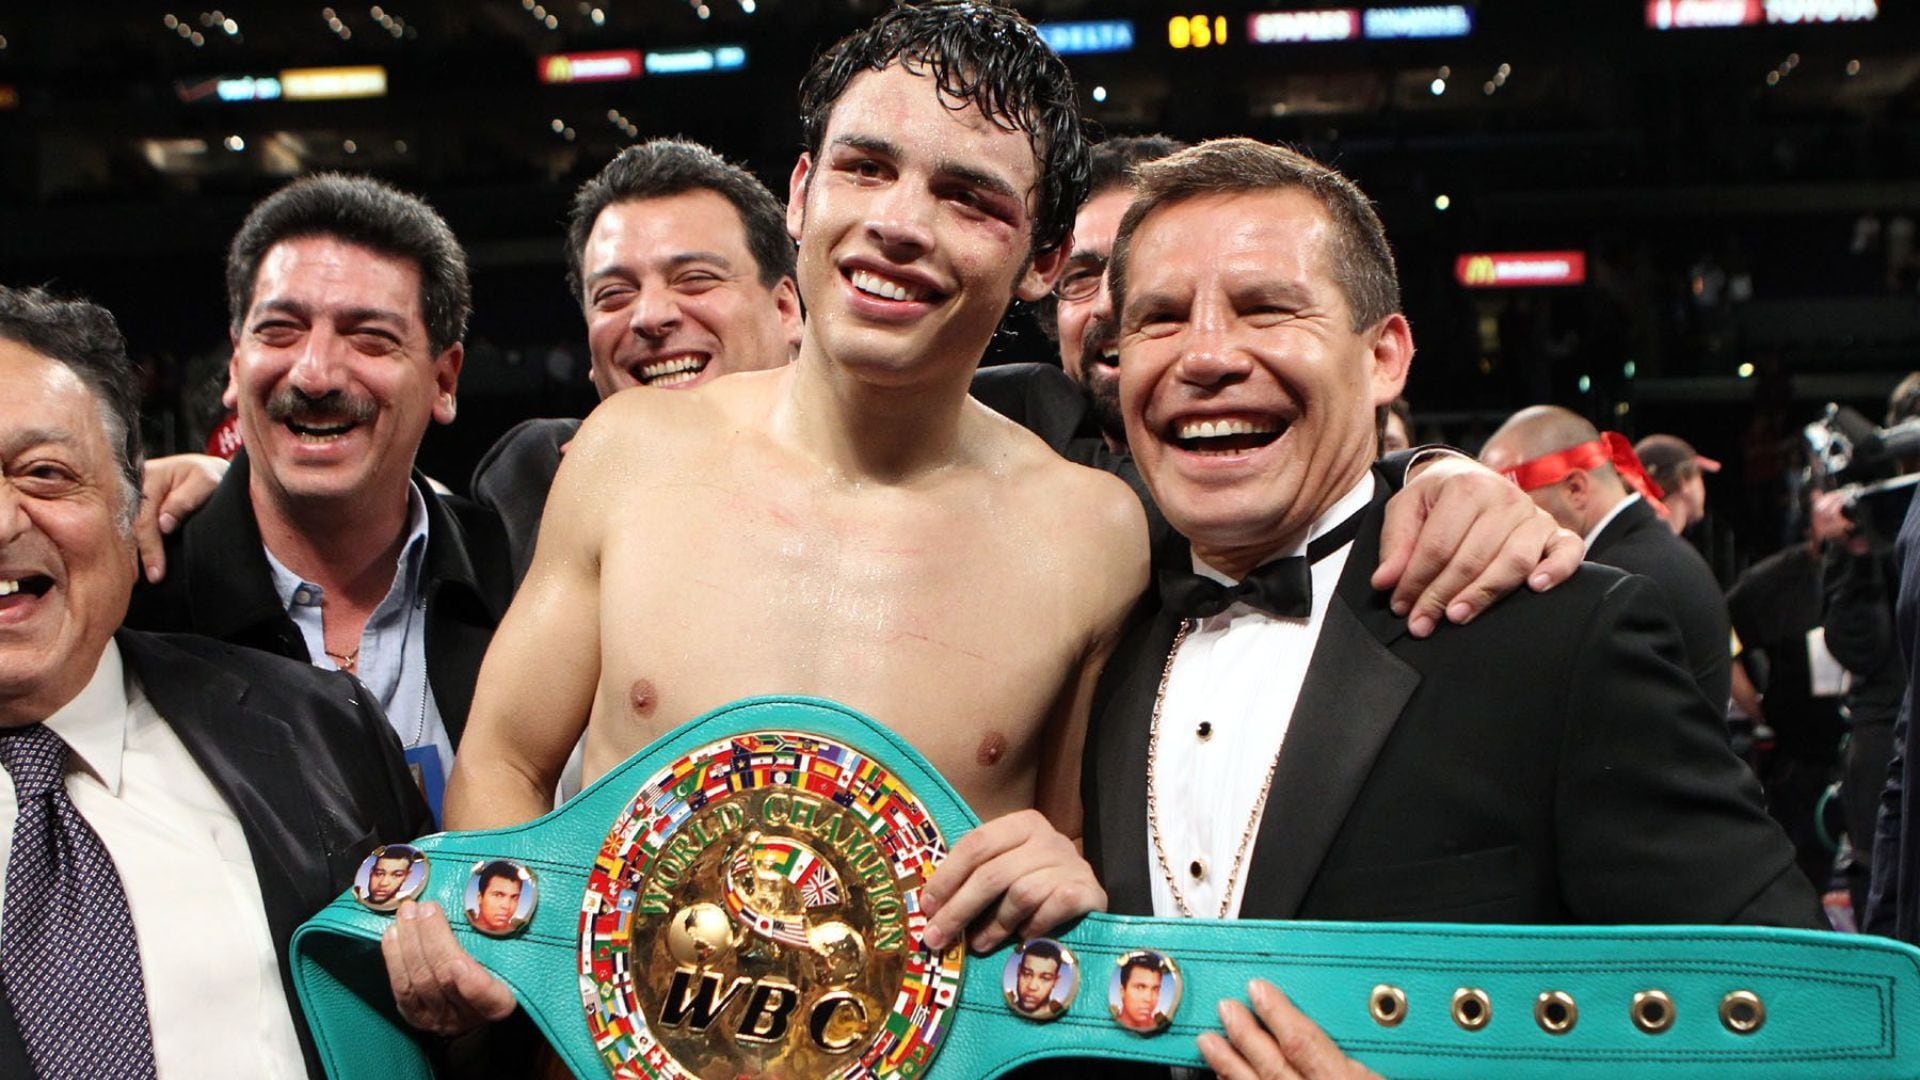 June 4, 2011, Los Angeles,Ca. ---  Julio Cesar Chavez Jr.(ctr)poses with his father legendary Julio Cesar Chavez (R)after defeatng Sebastian Zbik by 12-round majority decision to win the WBC World Middleweight title Saturday at Staples Center in Los Angeles.  --- Photo Credit : Chris Farina - Top Rank  (no other credit allowed)  copyright 2011